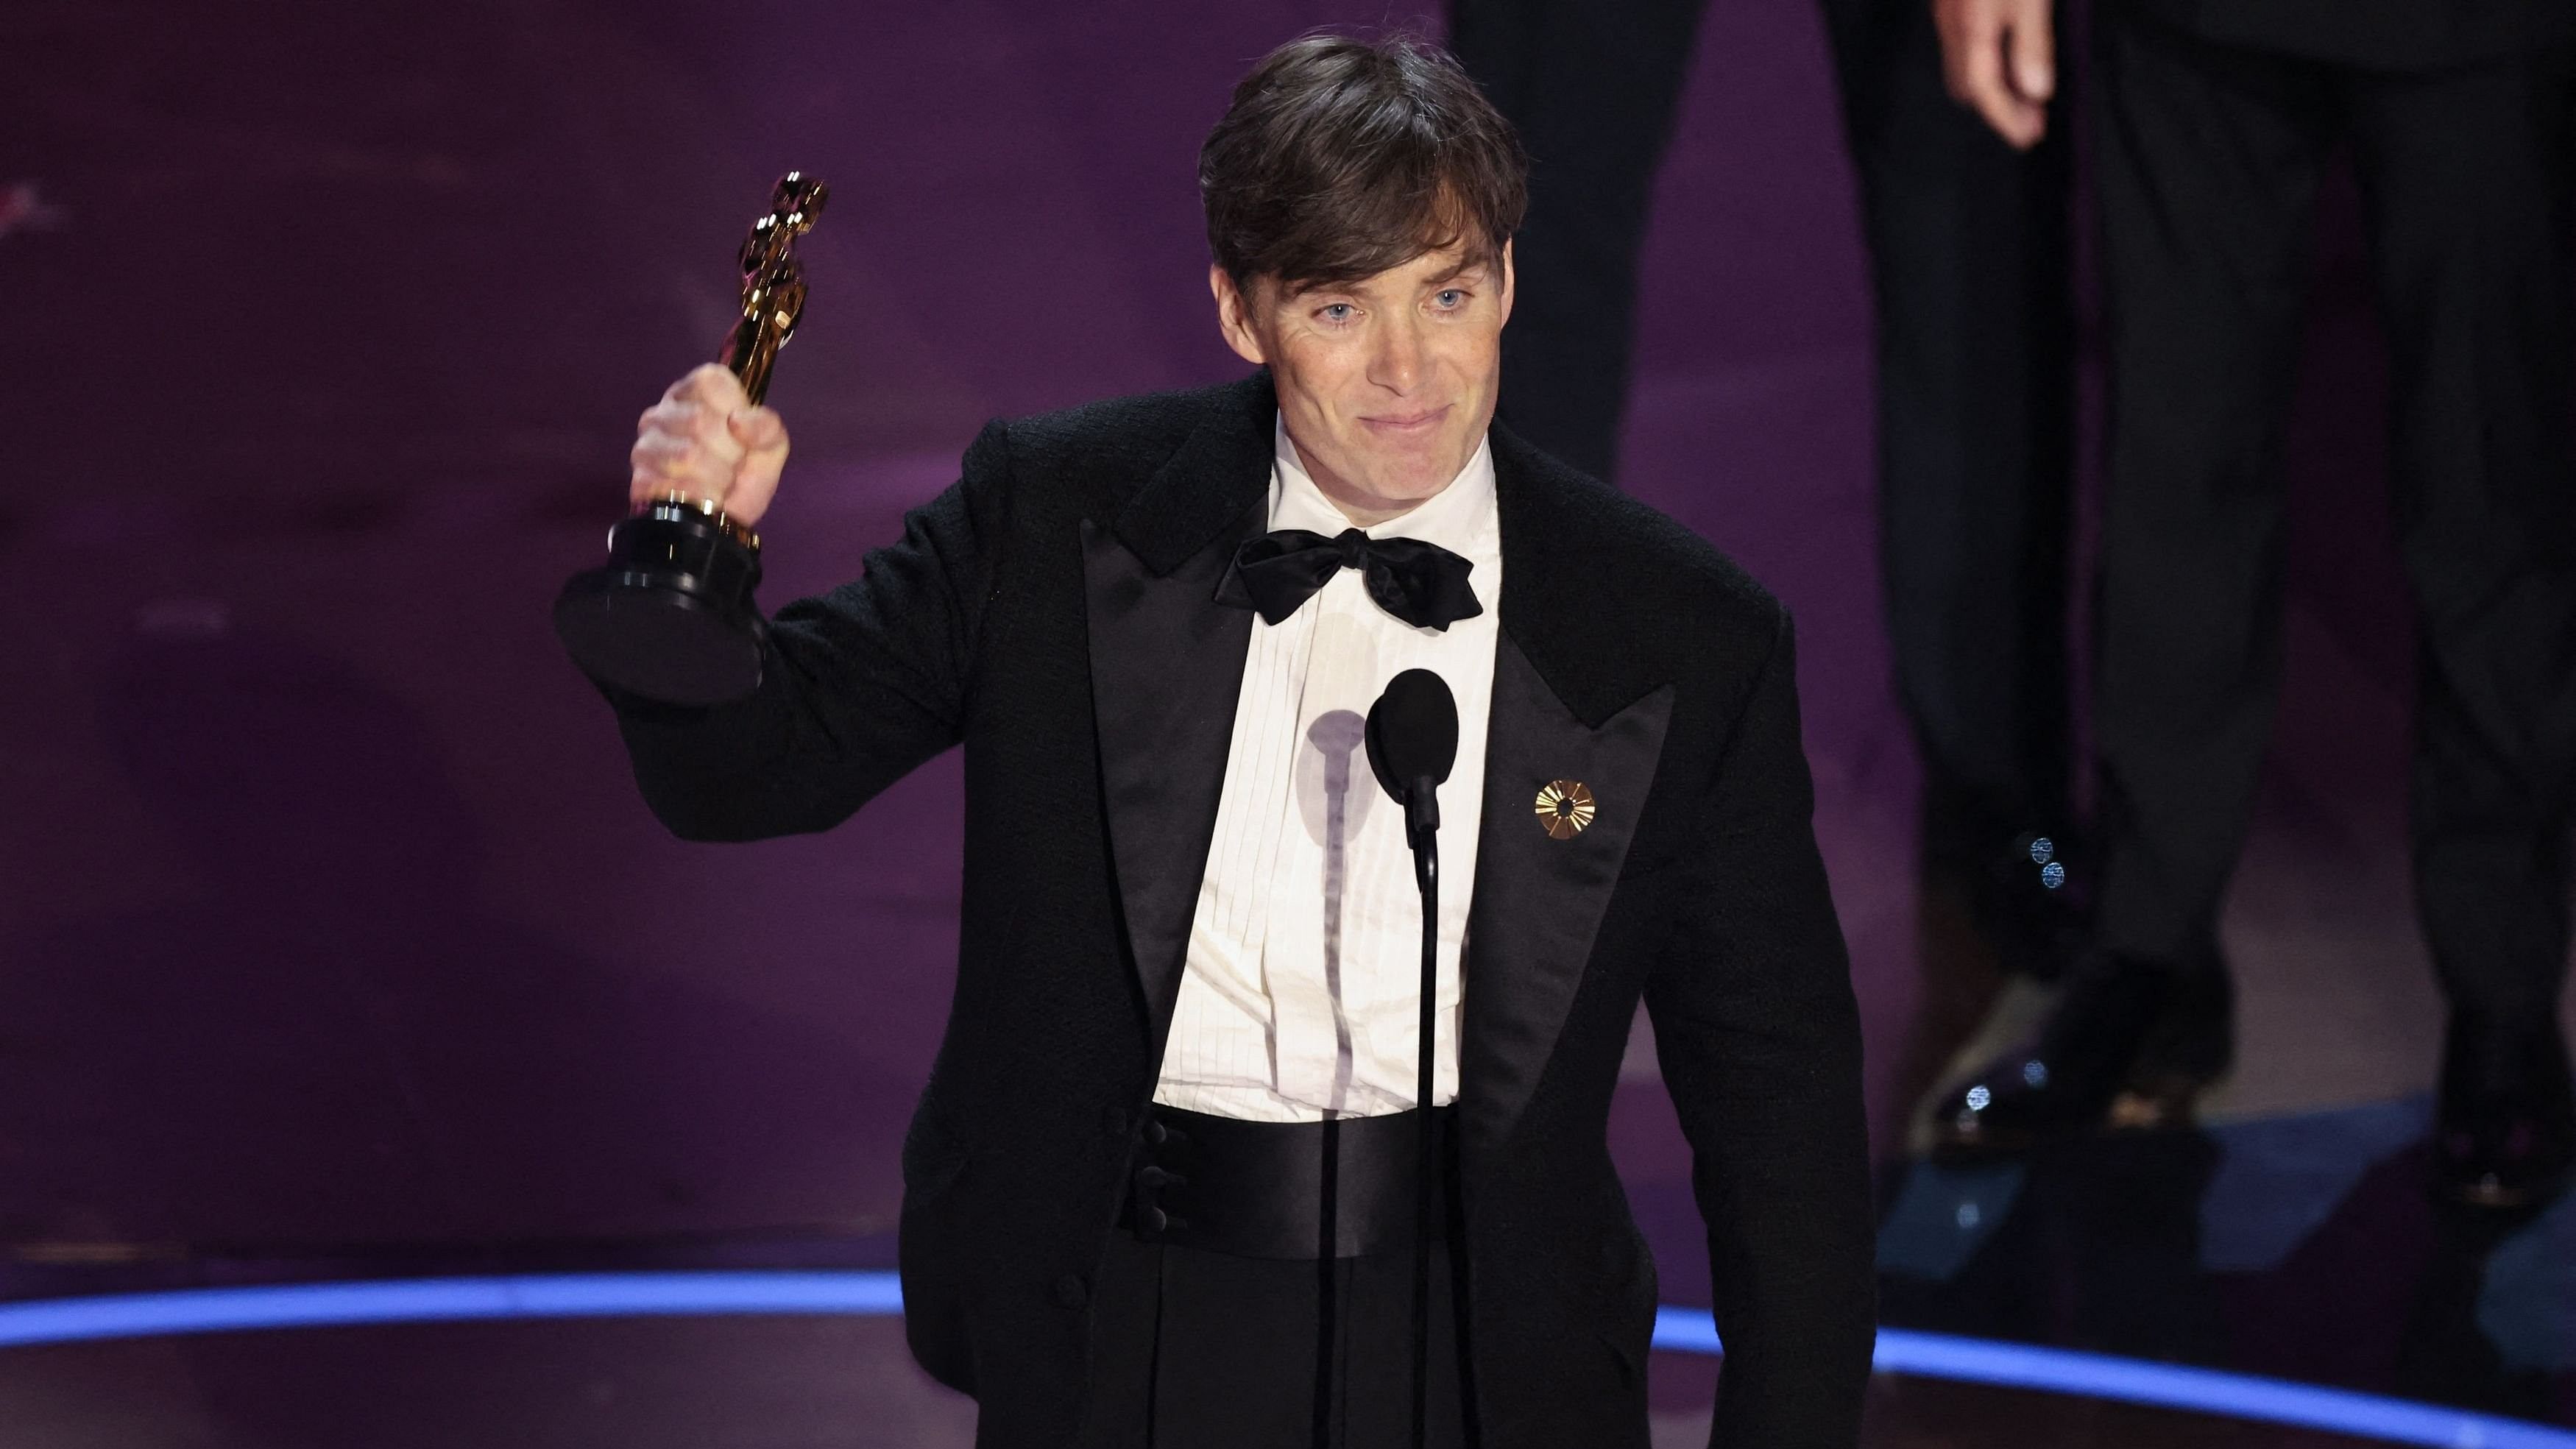 <div class="paragraphs"><p>Cillian Murphy wins the Oscar for Best Actor for <em>Oppenheimer</em> during the Oscars show at the 96th Academy Awards in Hollywood, Los Angeles.</p></div>